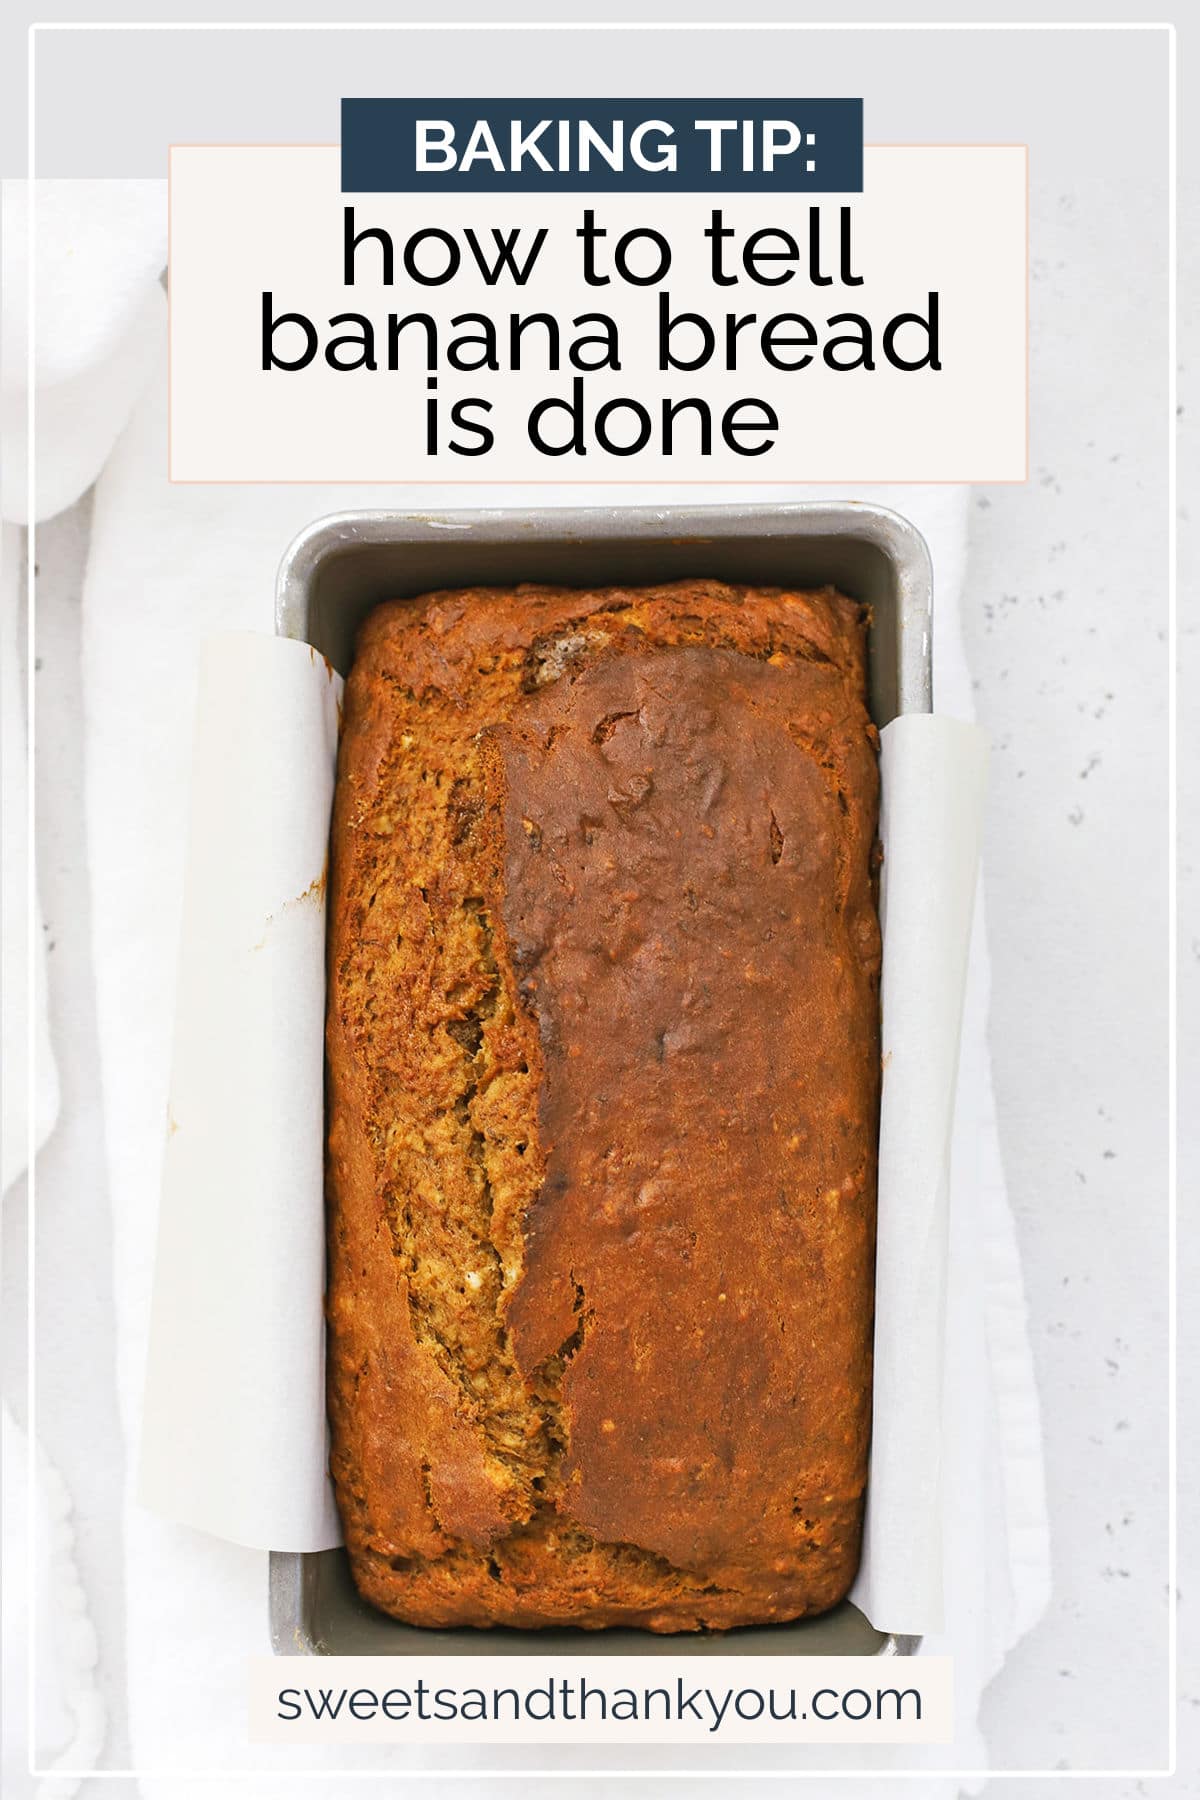 How To Tell When Banana Bread Is Done - How do you know your banana bread is done? We'll walk you through our tried & true tricks so you don't end up with under-baked banana bread again. // how to fix undercooked banana bread // how to tell if banana bread is done // how to tell if banana bread is cooked all the way through // baking tips // gluten free baking tips // banana bread tips // toothpick trick // how to tell if banana bread is cooked without a thermometer // 